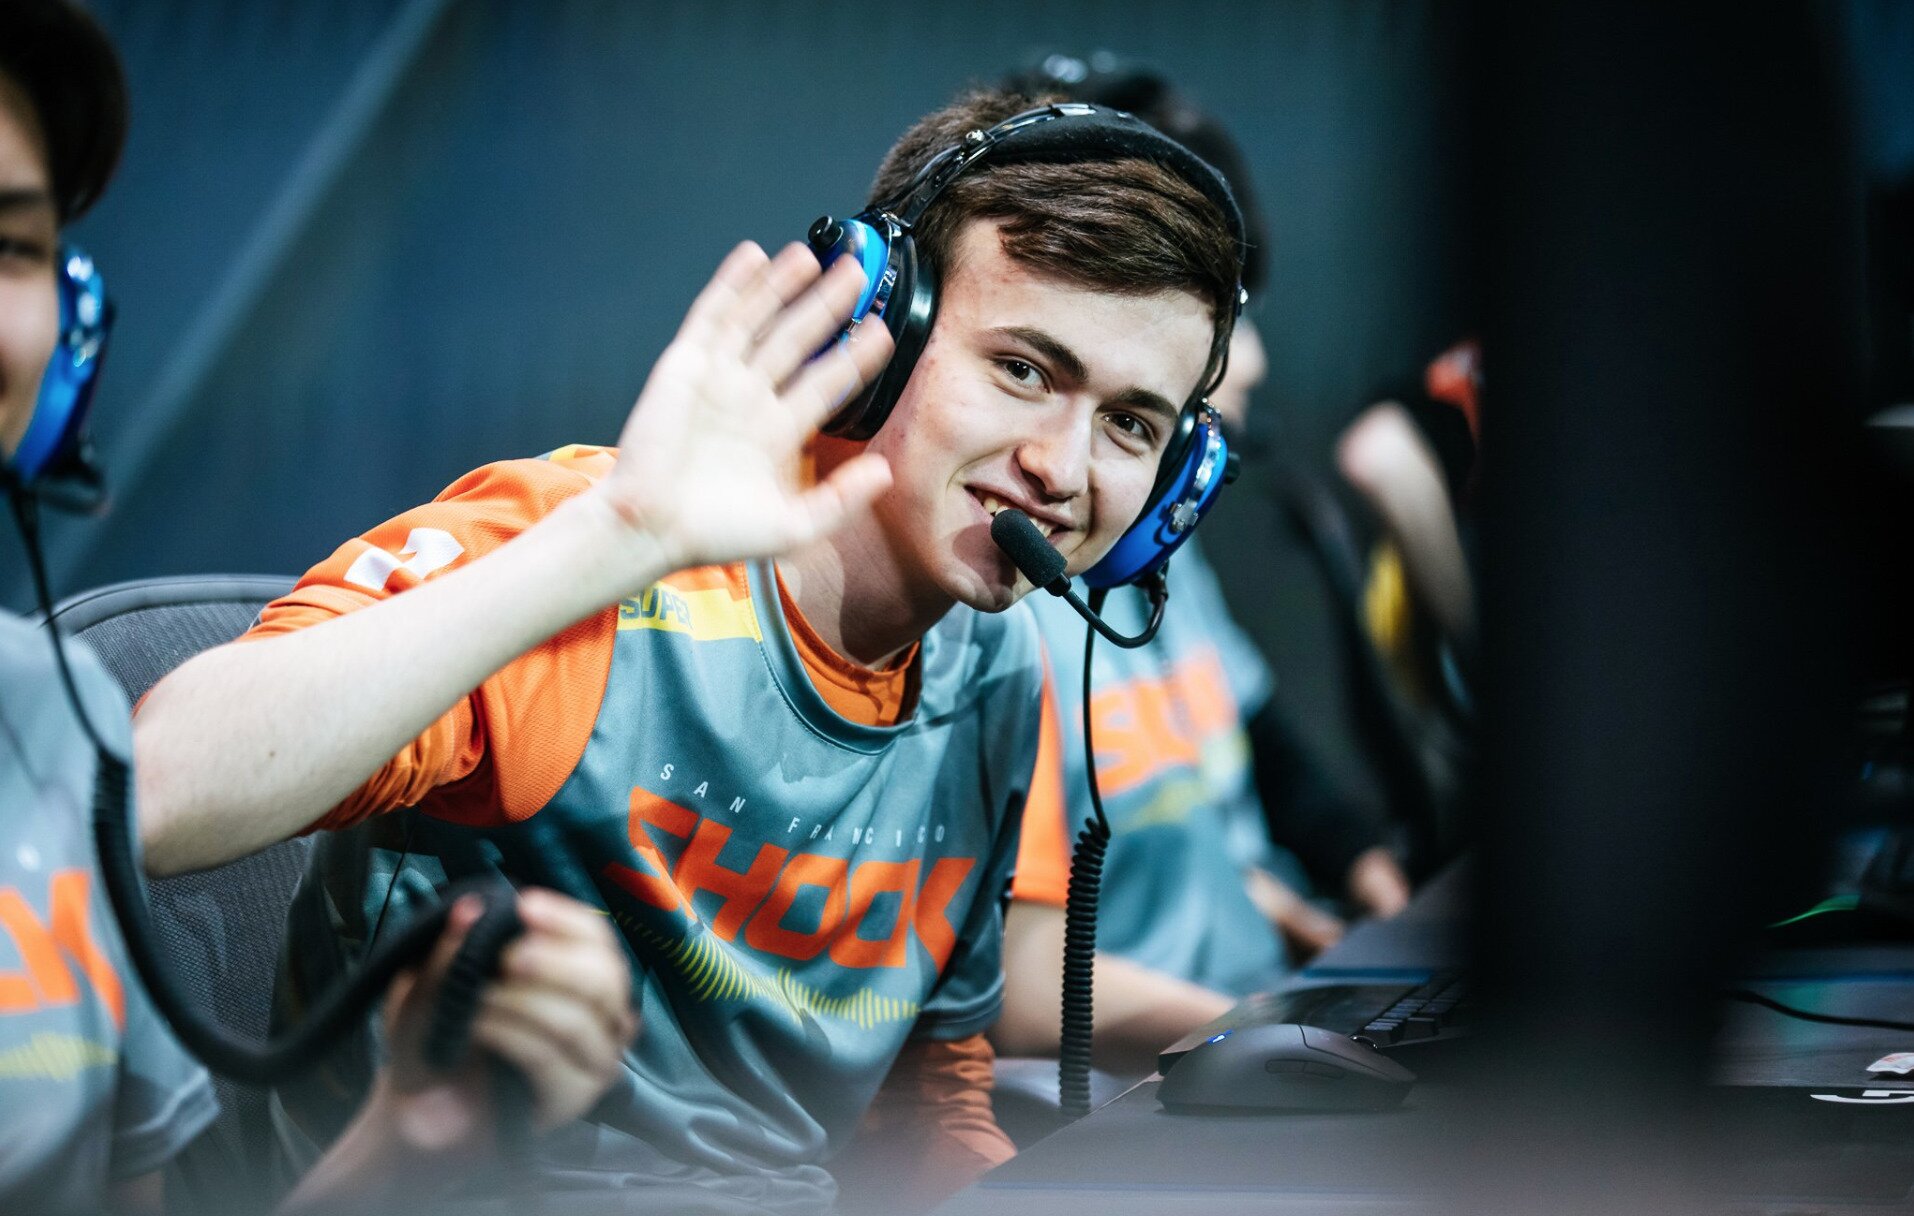 The Shock enter the Stage 2 playoffs coming off the first stage in Overwatch League history (photo courtesy of Overwatch League)